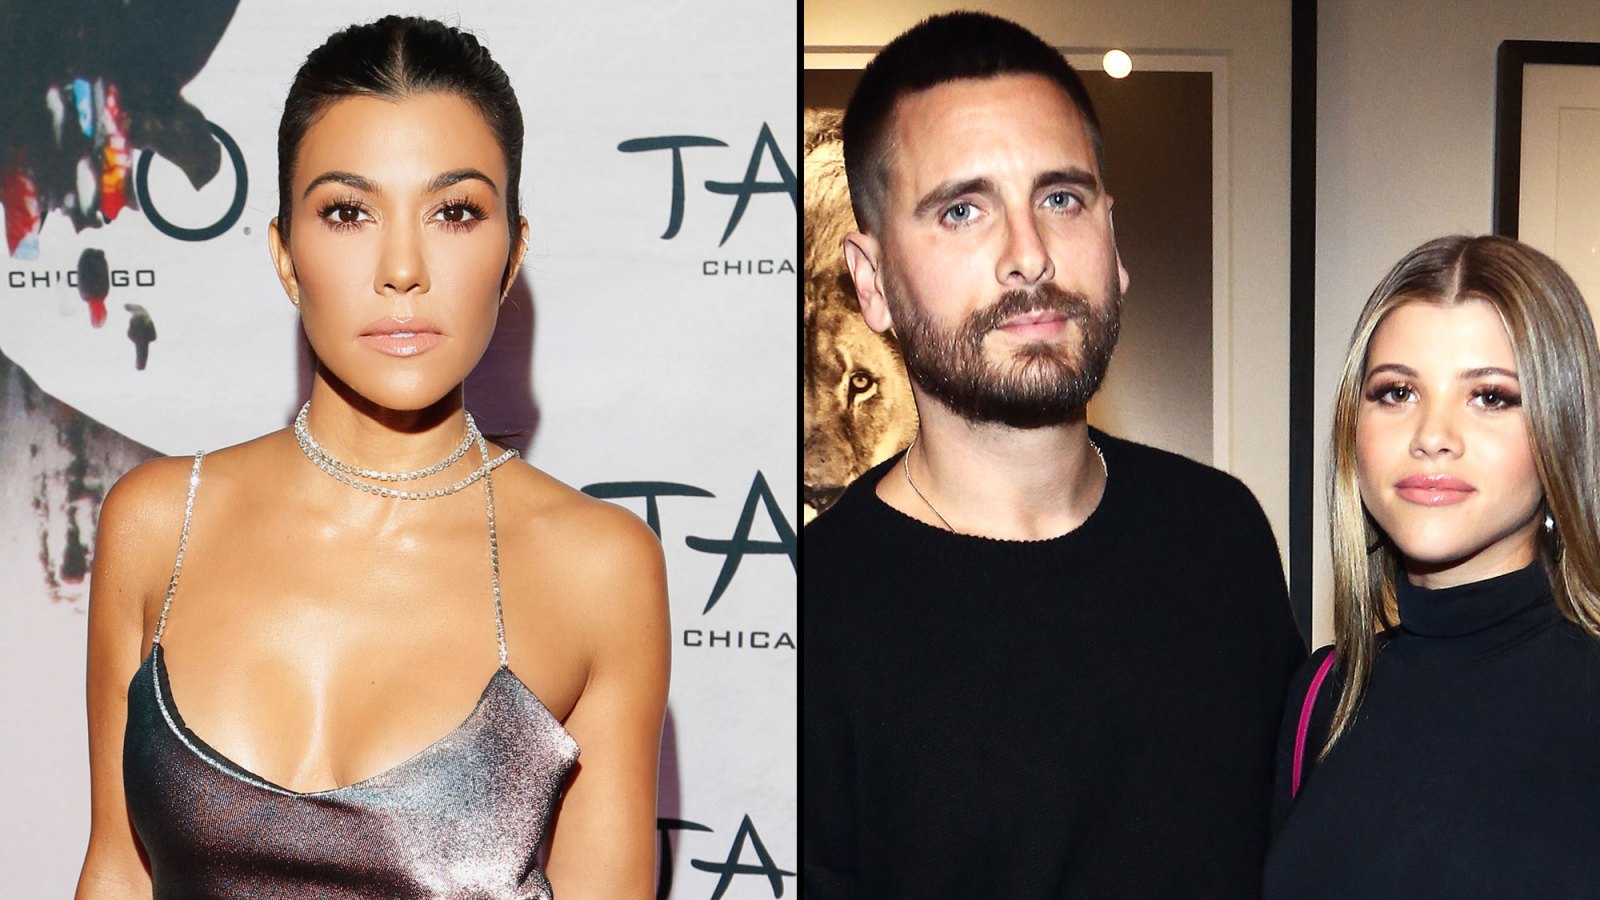 Kourtney Kardashian Is Now in a ‘Much Better Space’ With Scott Disick and Sofia Richie